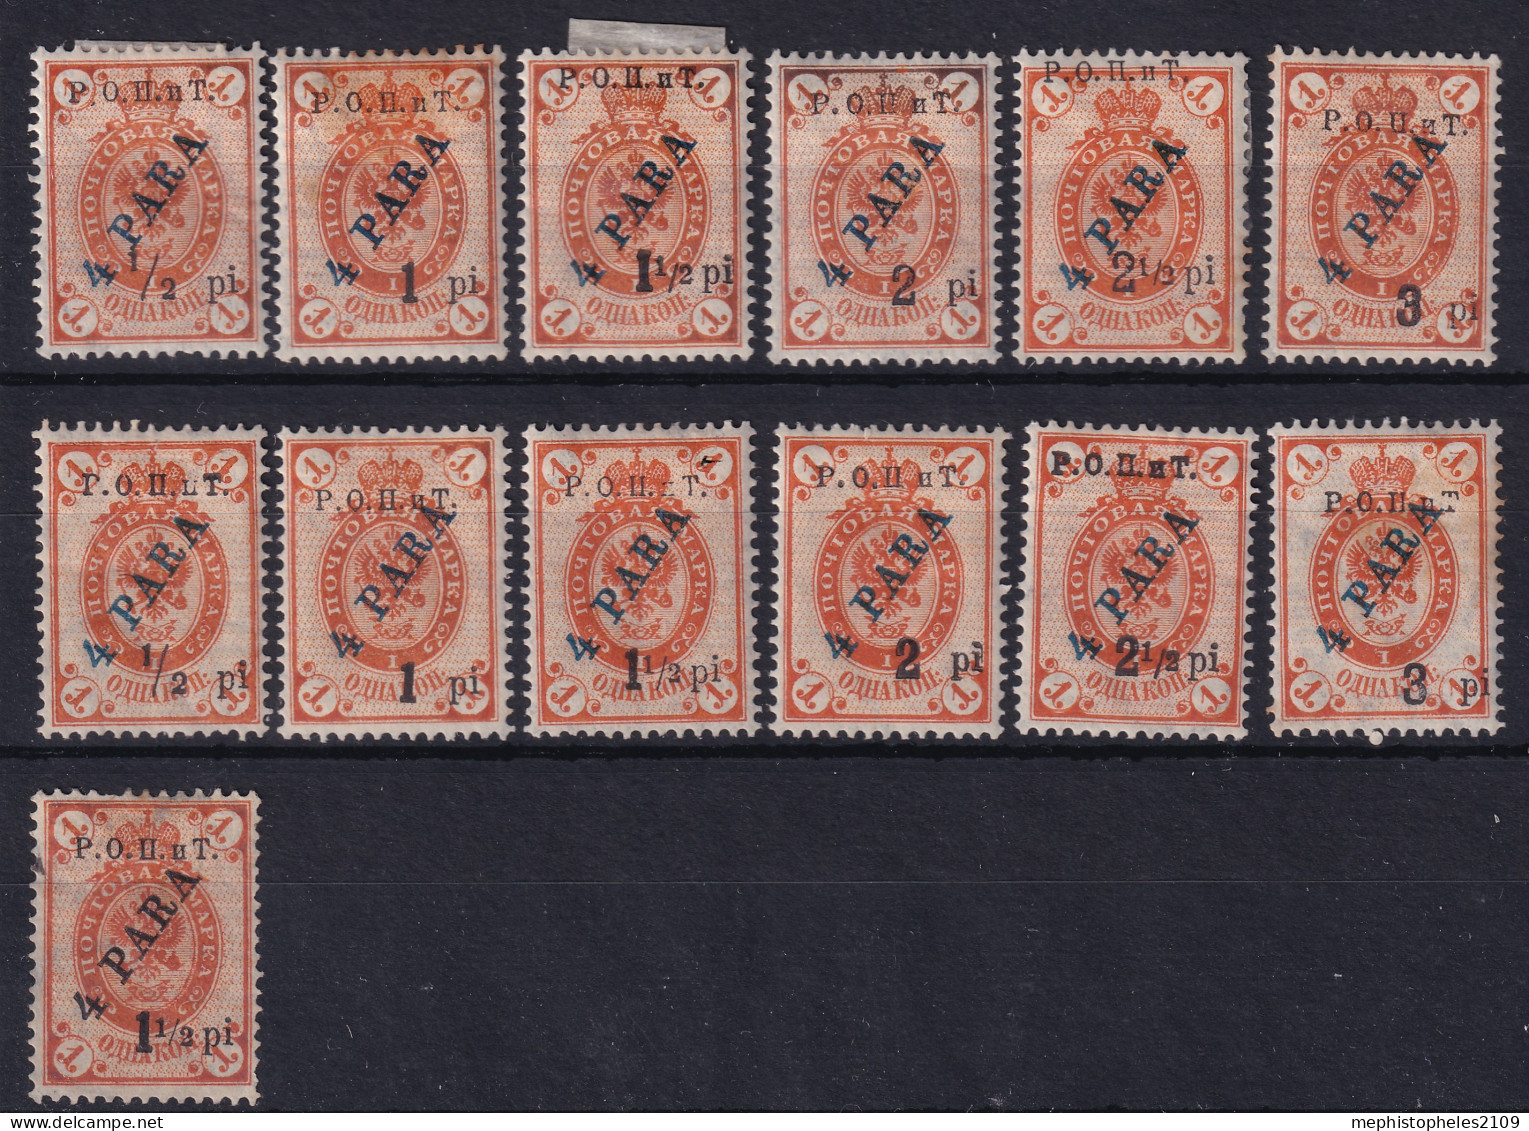 RUSSIAN COMPANY OF NAVIGATION & TRADE 1900 - MLH - 13 Stamps Overprinted - Levant